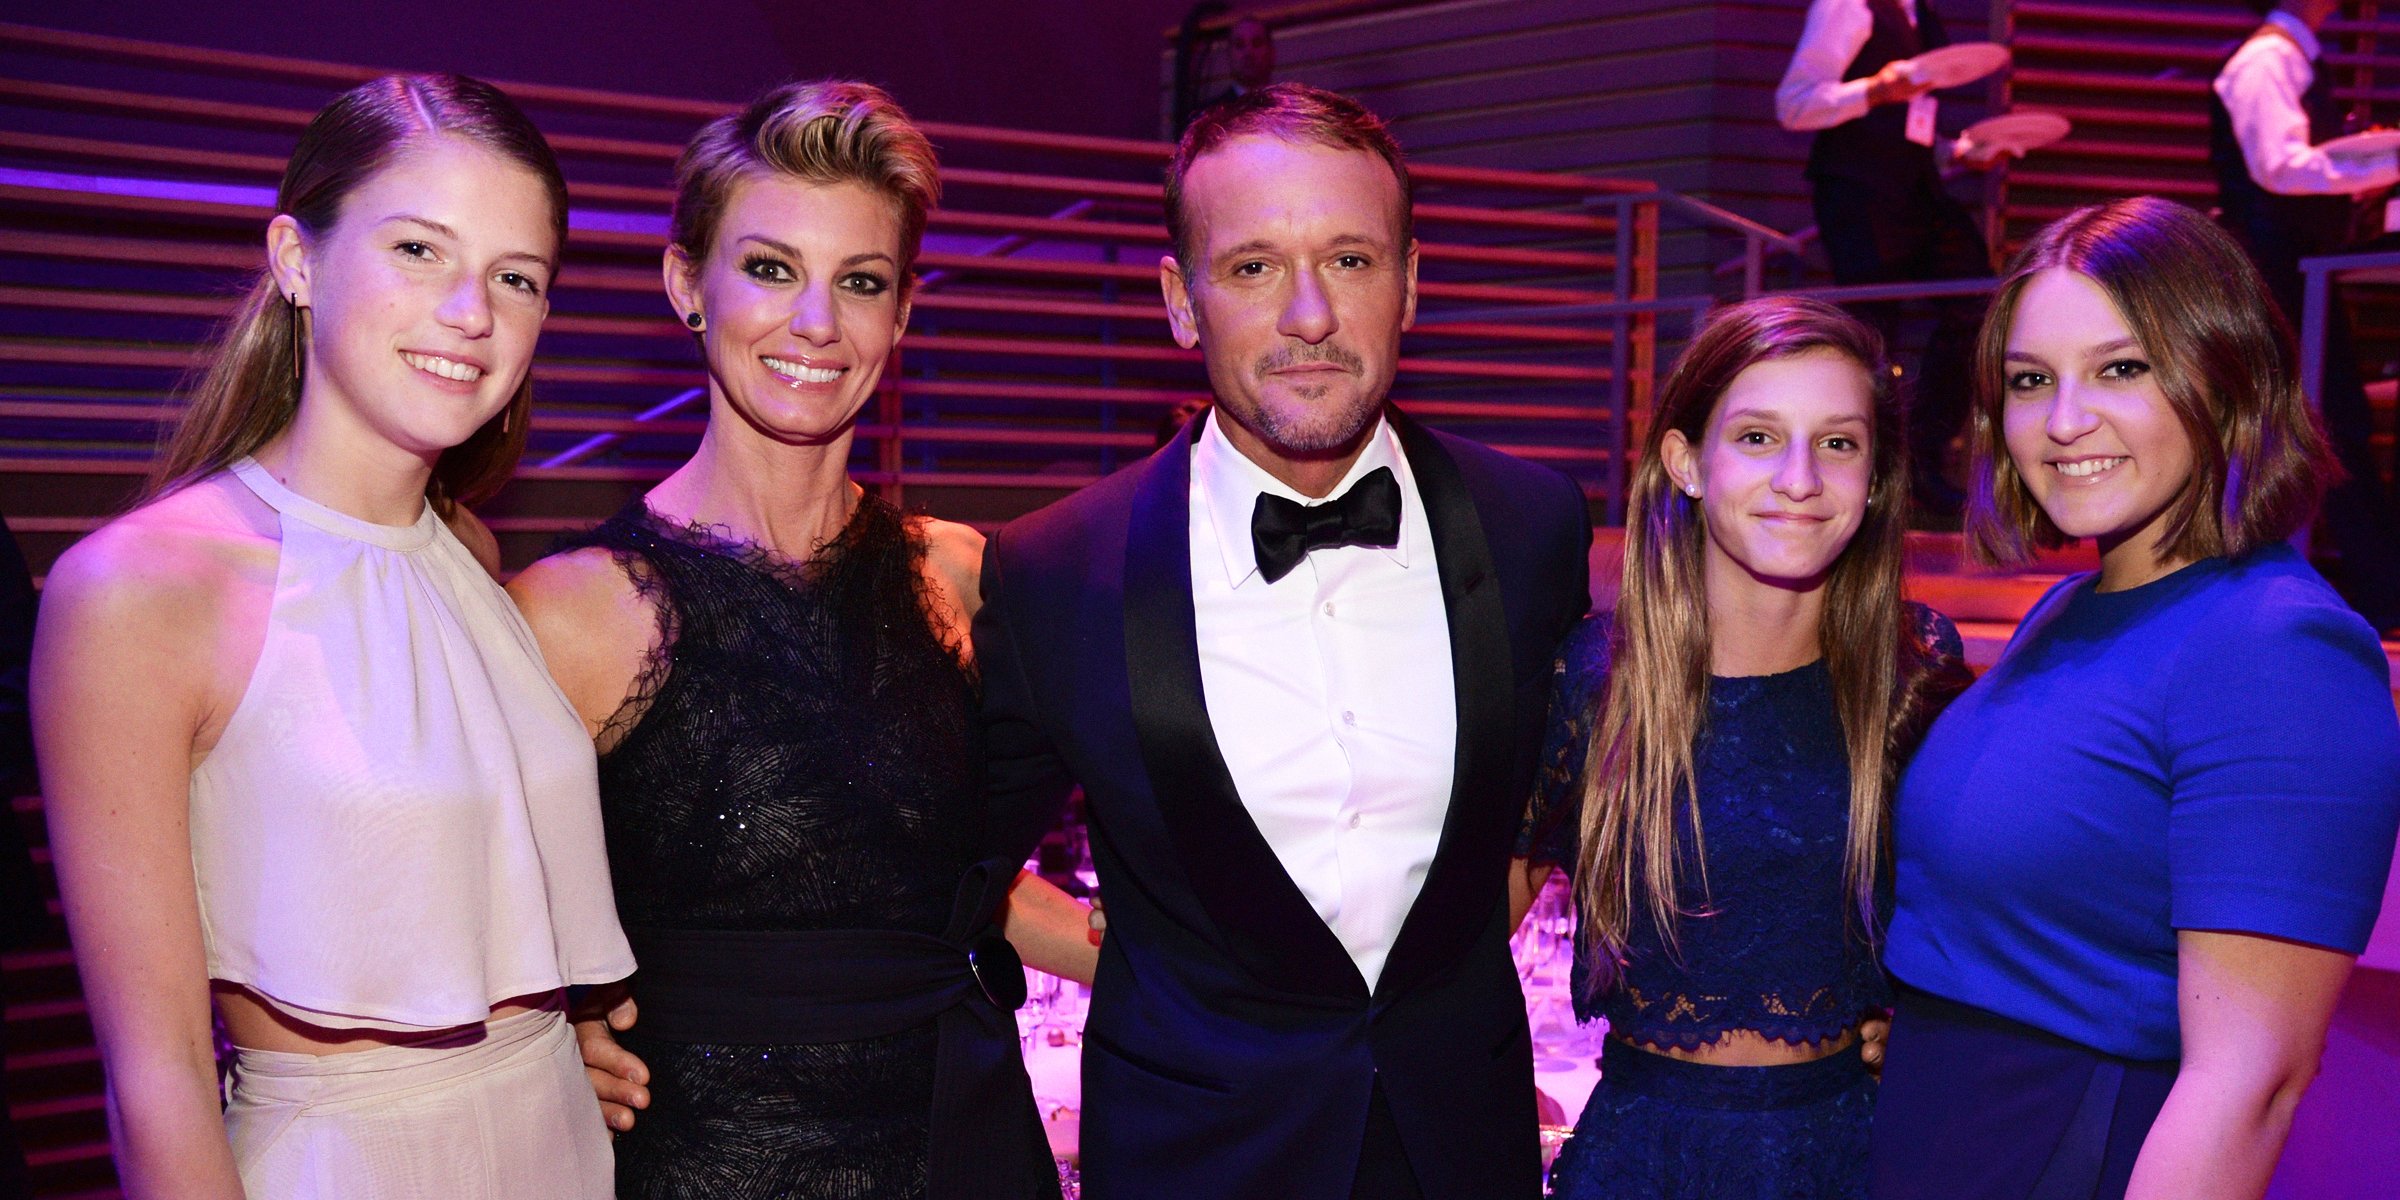 Gracie McGraw, Faith Hill, Tim McGraw, Audrey McGraw, and Maggie McGraw, 2015 | Source: Getty Images